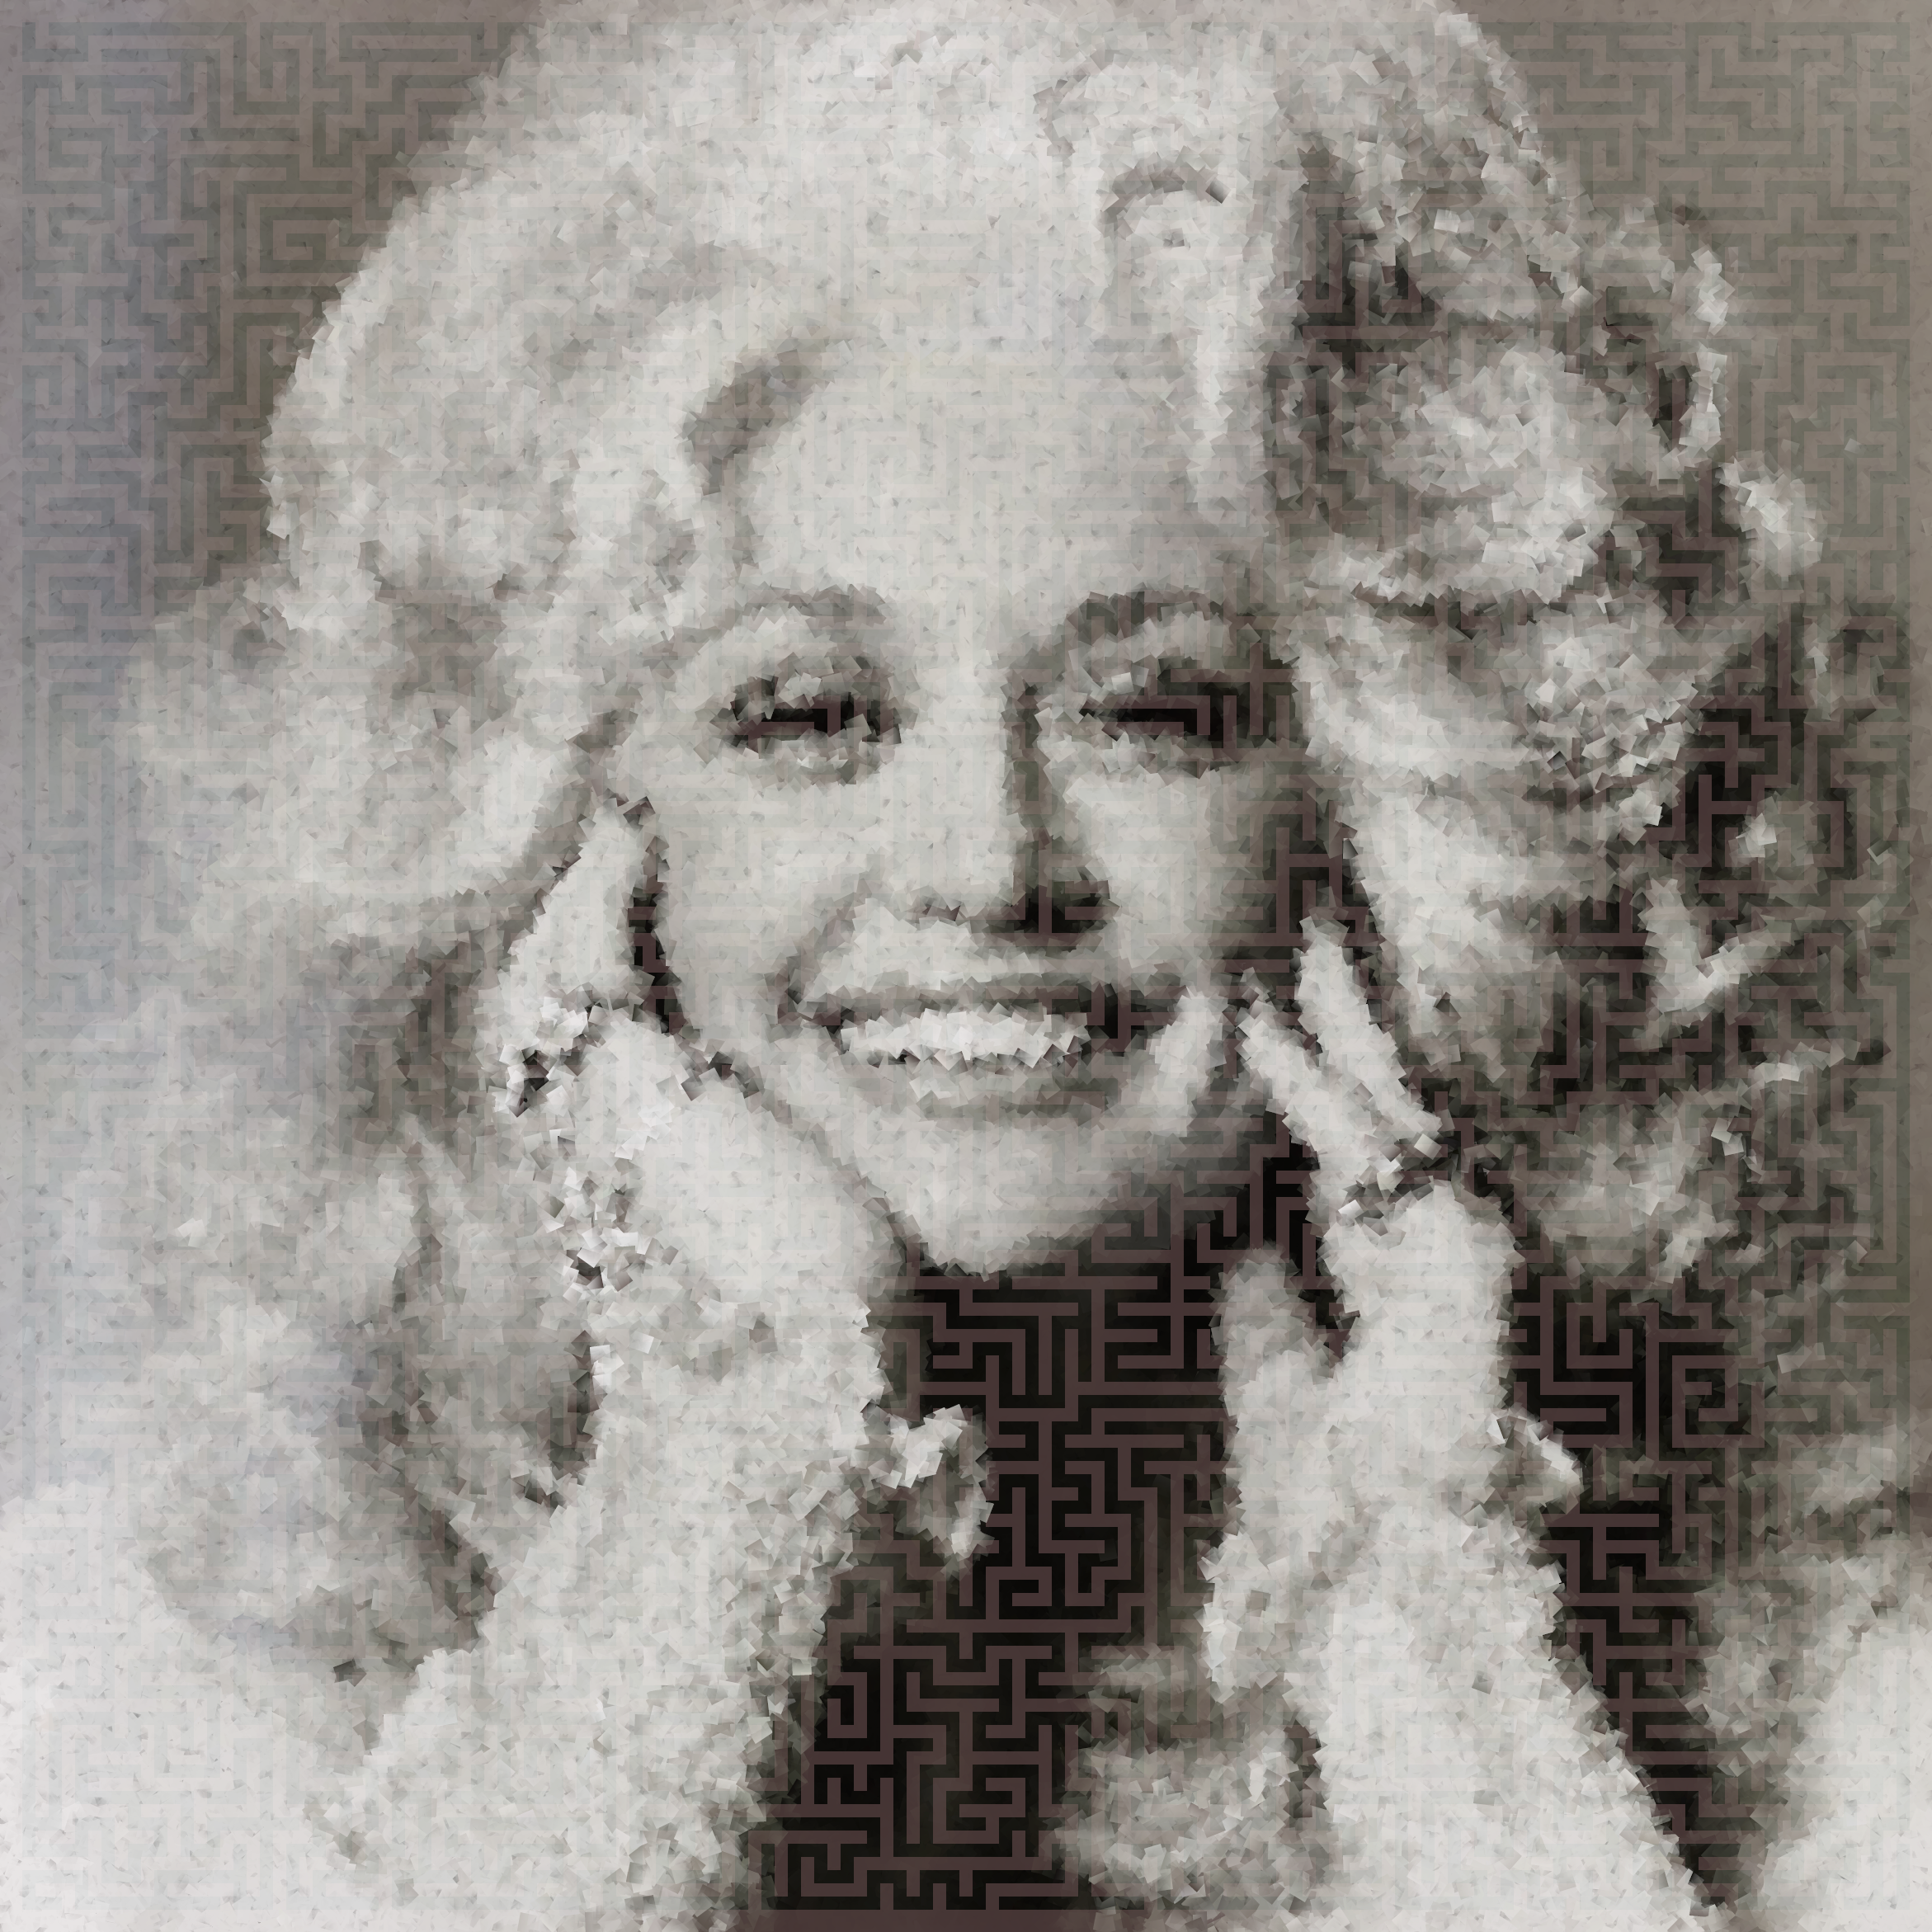 dolly parton blurry with maze edit